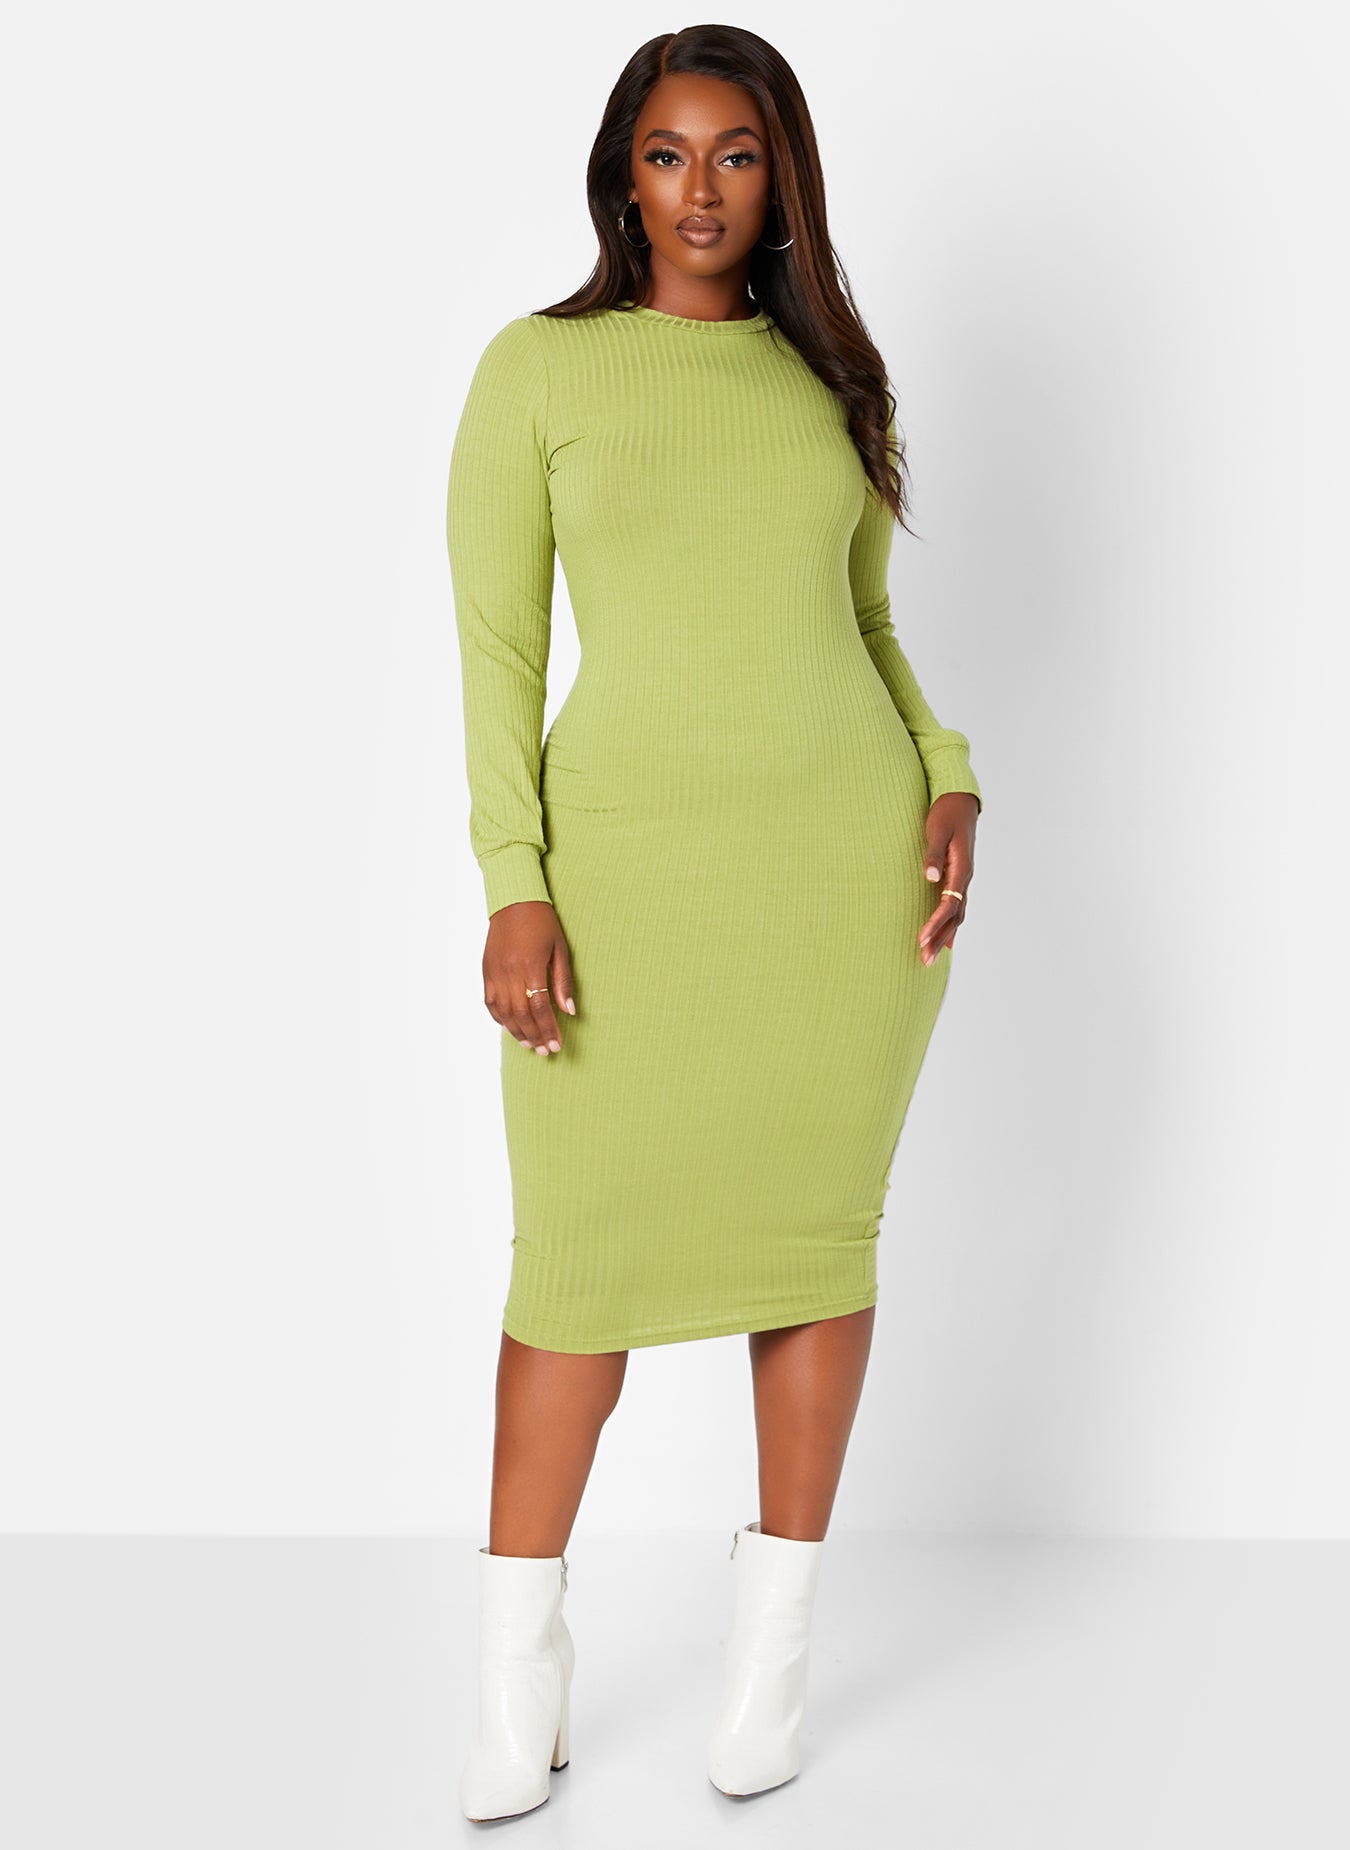 Moss Green Simpler Things Ribbed Bodycon Midi Dress Plus Sizes